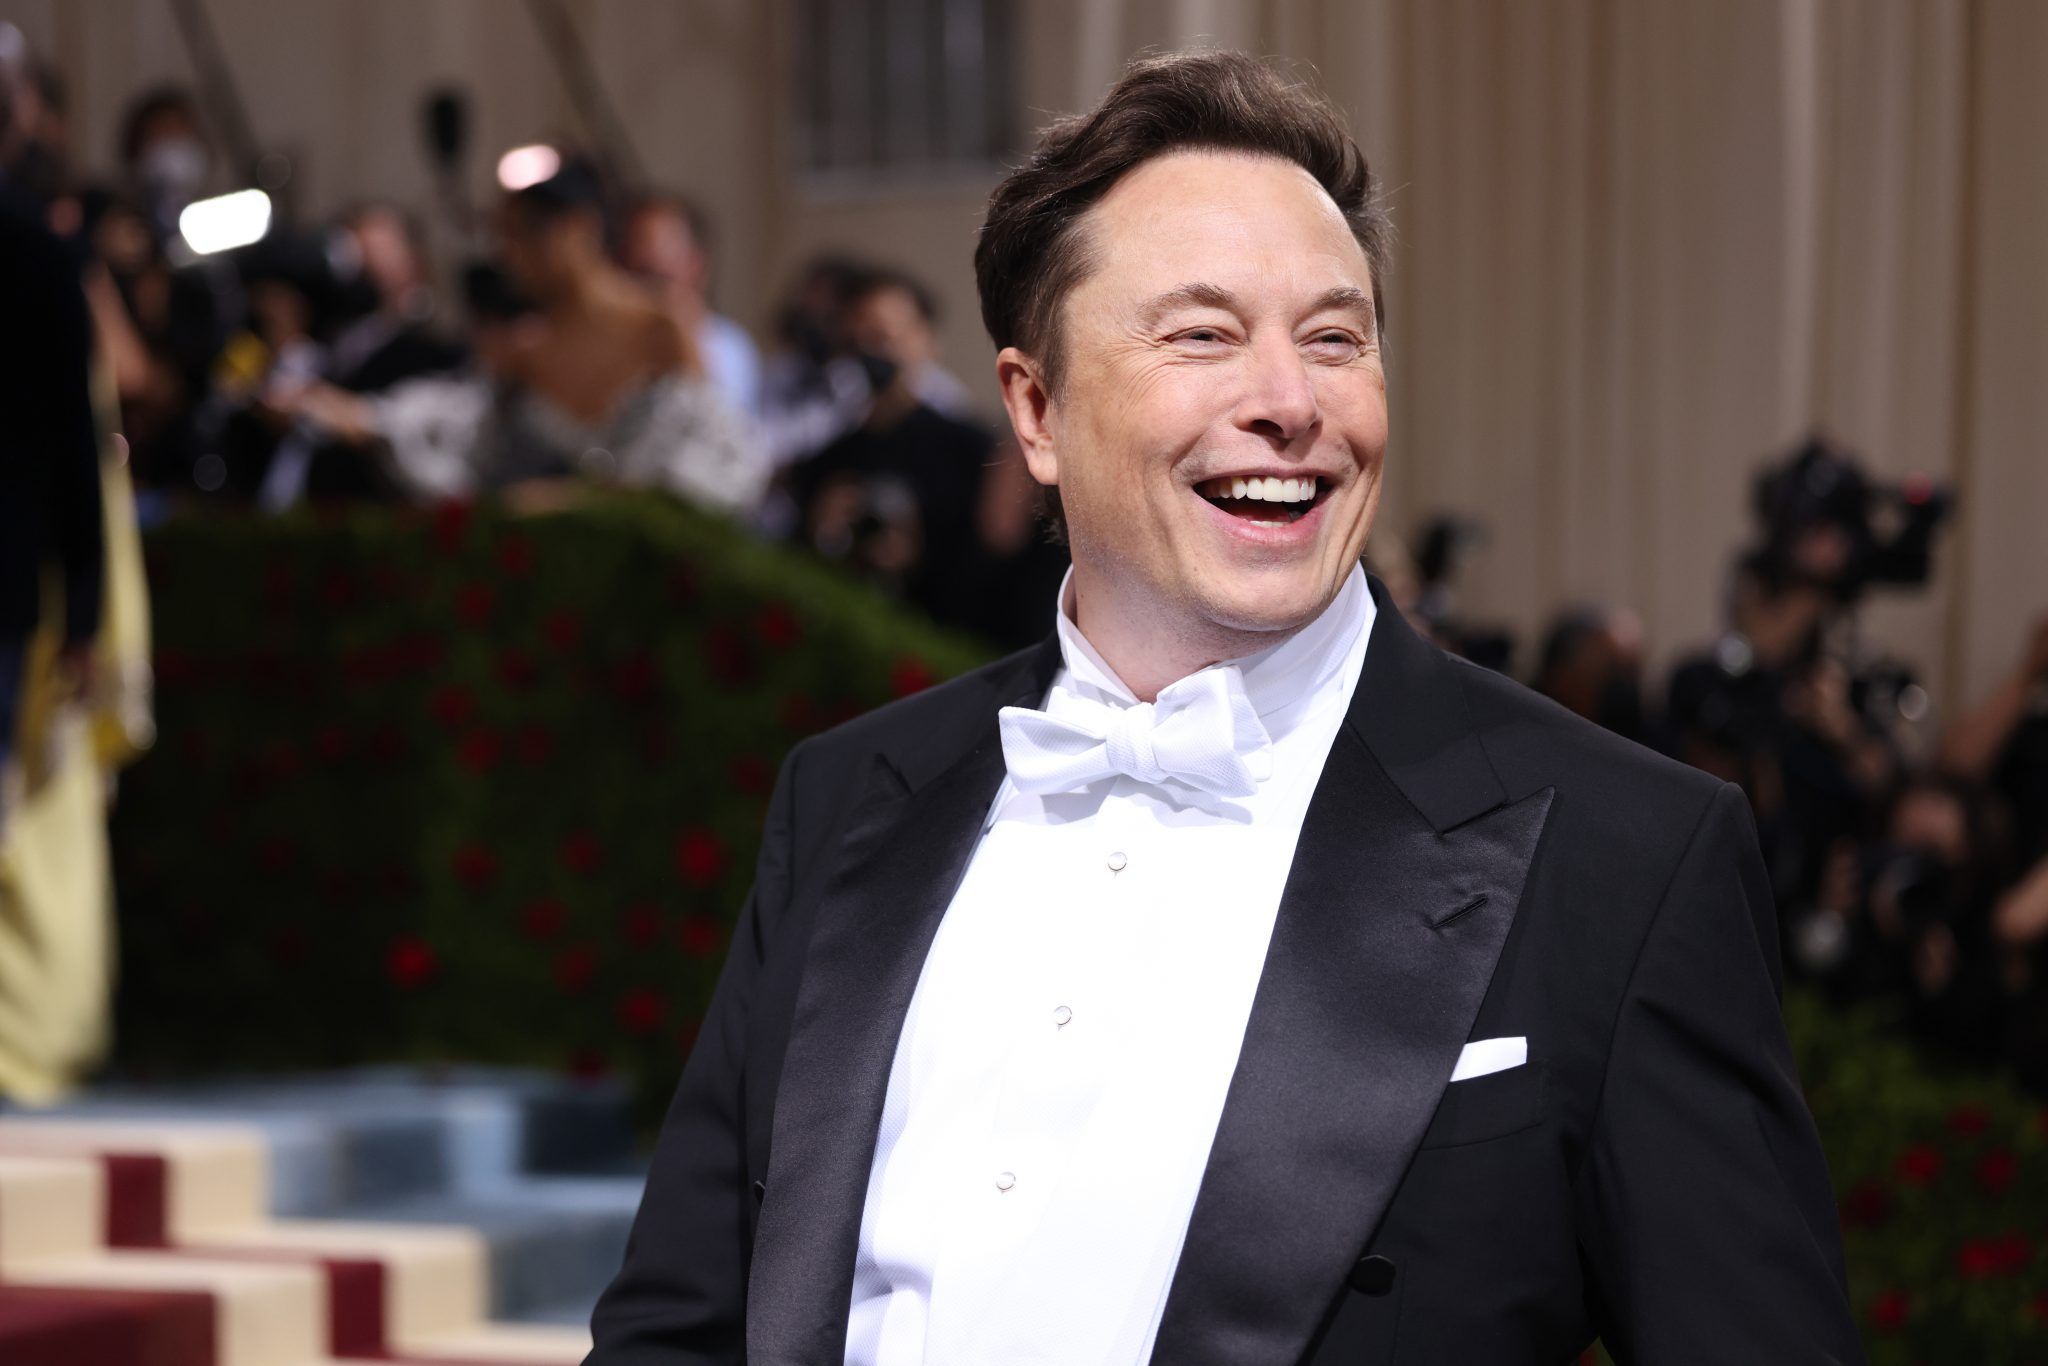 NEW YORK, NEW YORK - MAY 02: Elon Musk attends The 2022 Met Gala Celebrating "In America: An Anthology of Fashion" at The Metropolitan Museum of Art on May 02, 2022 in New York City. (Photo by John Shearer/Getty Images)